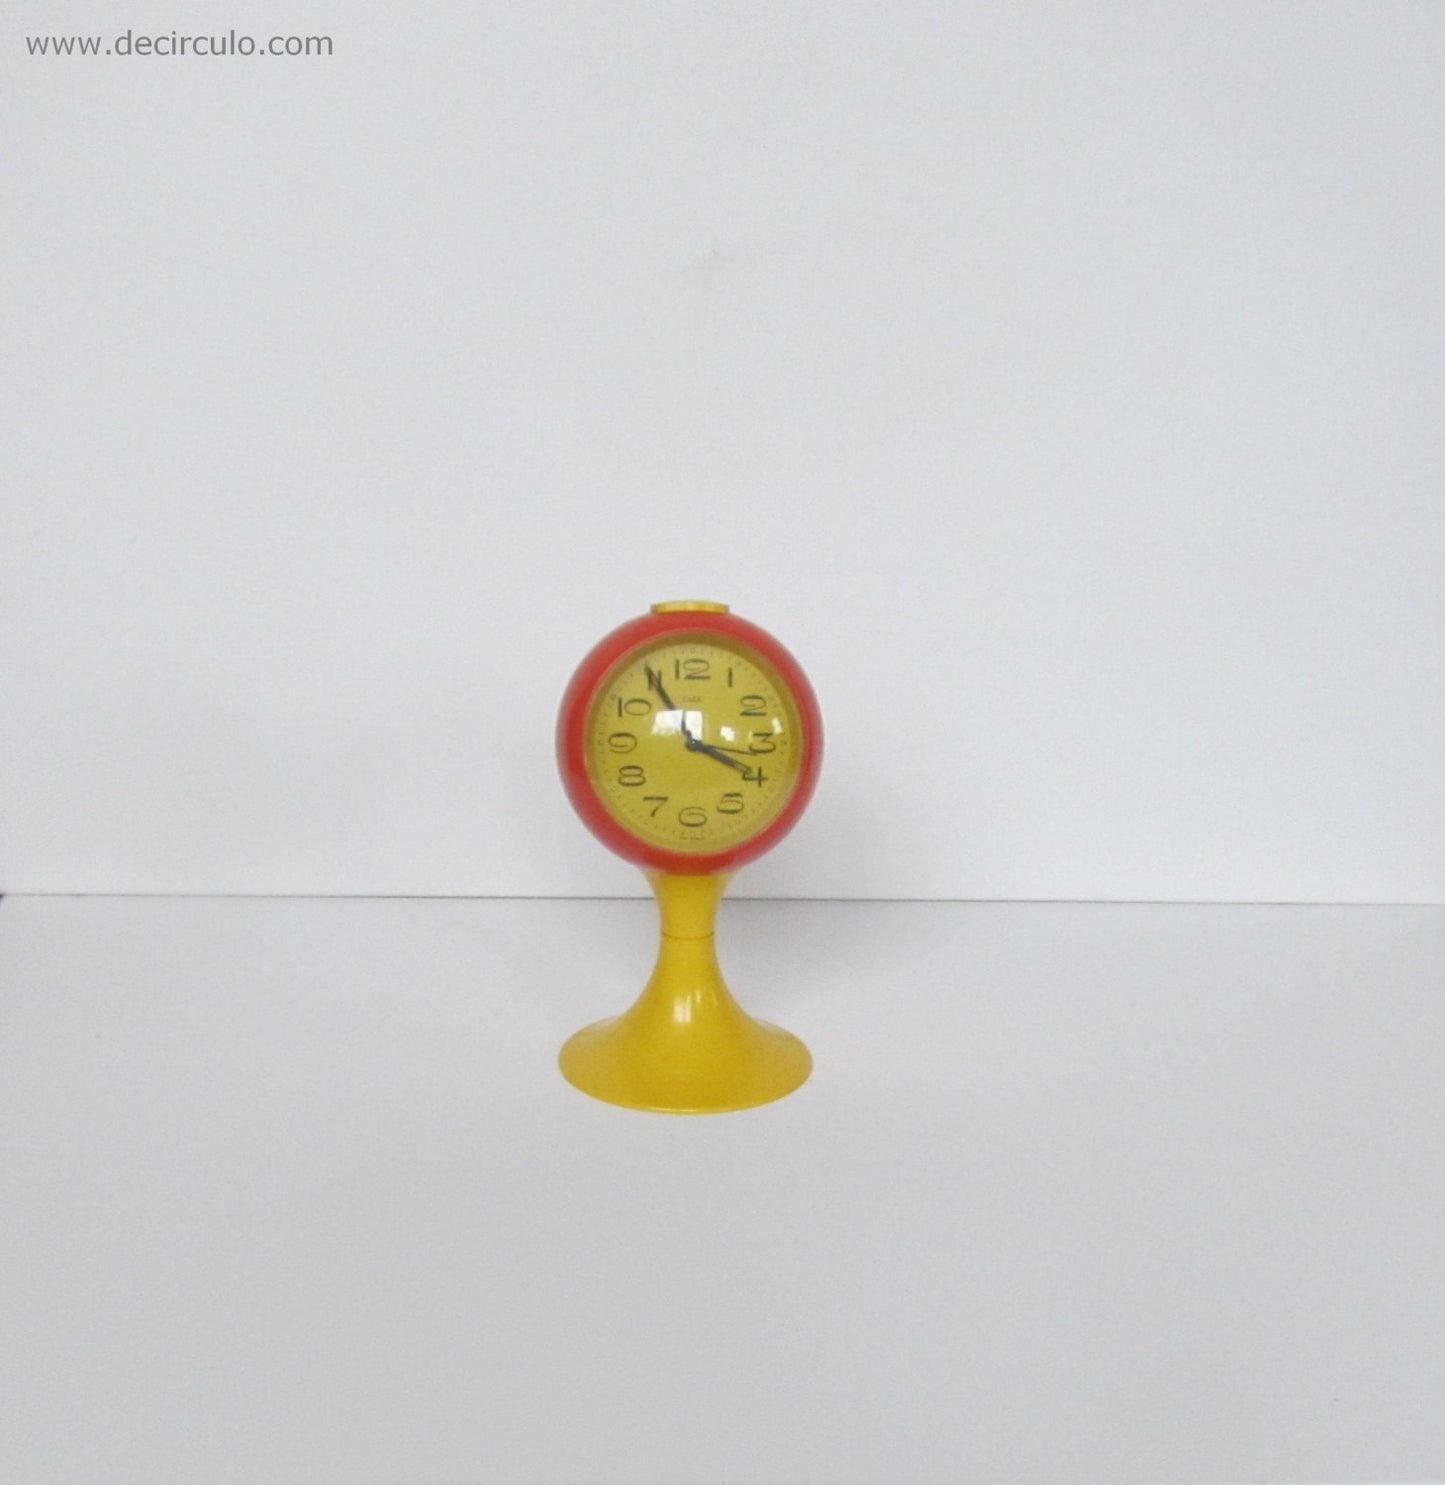 Yellow Orange alarm clock, pedestal tulip shape, made in Germany. Space age era, made of plastic from the early 1970s